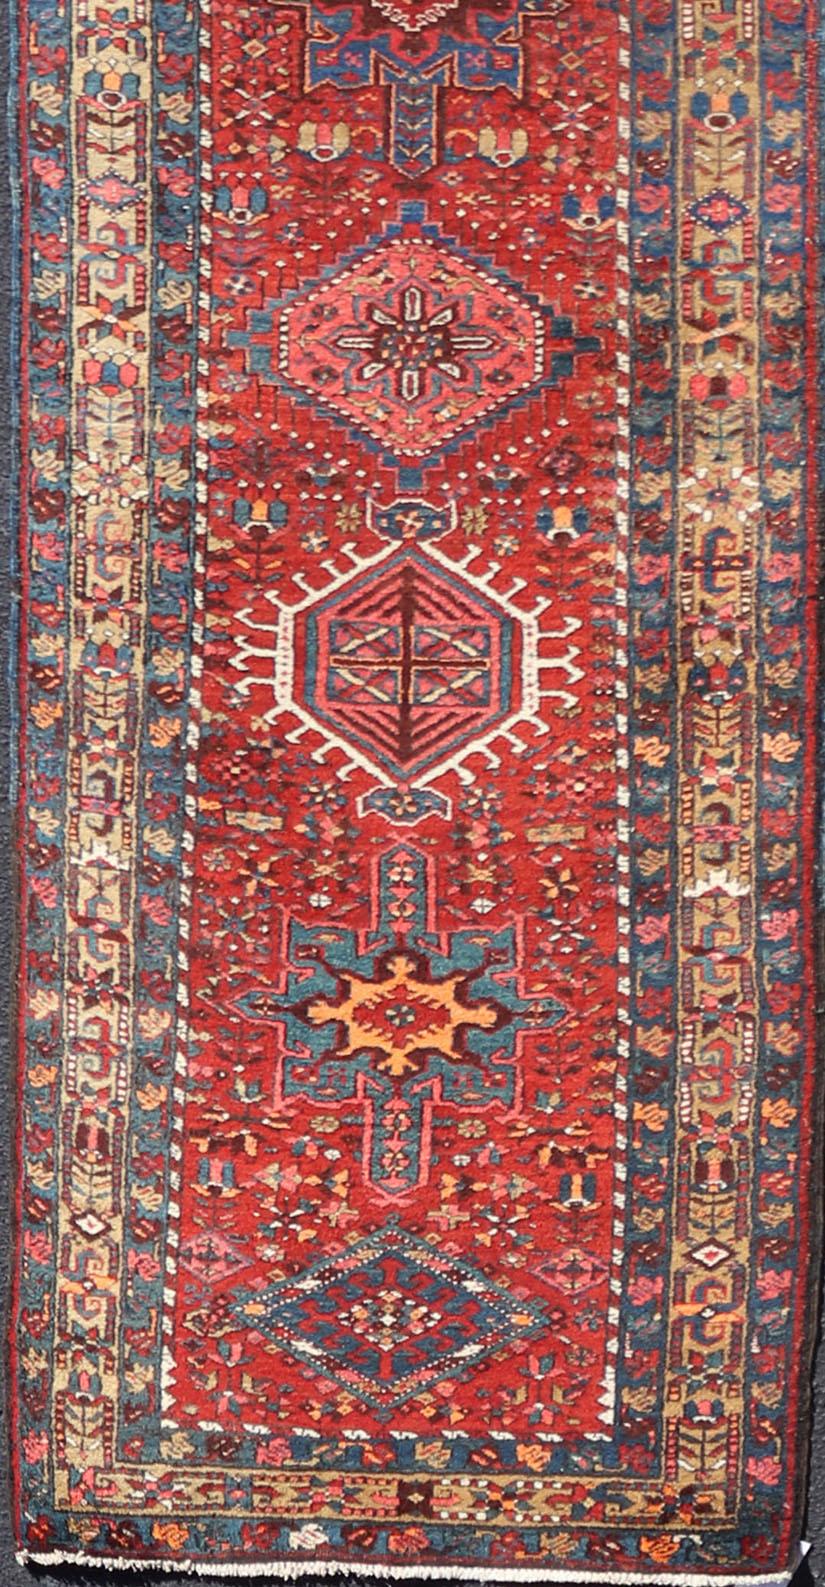 Antique Geometric Persian Long Heriz Runner in Red, Blue, Yellow, Teal, Orange In Excellent Condition For Sale In Atlanta, GA